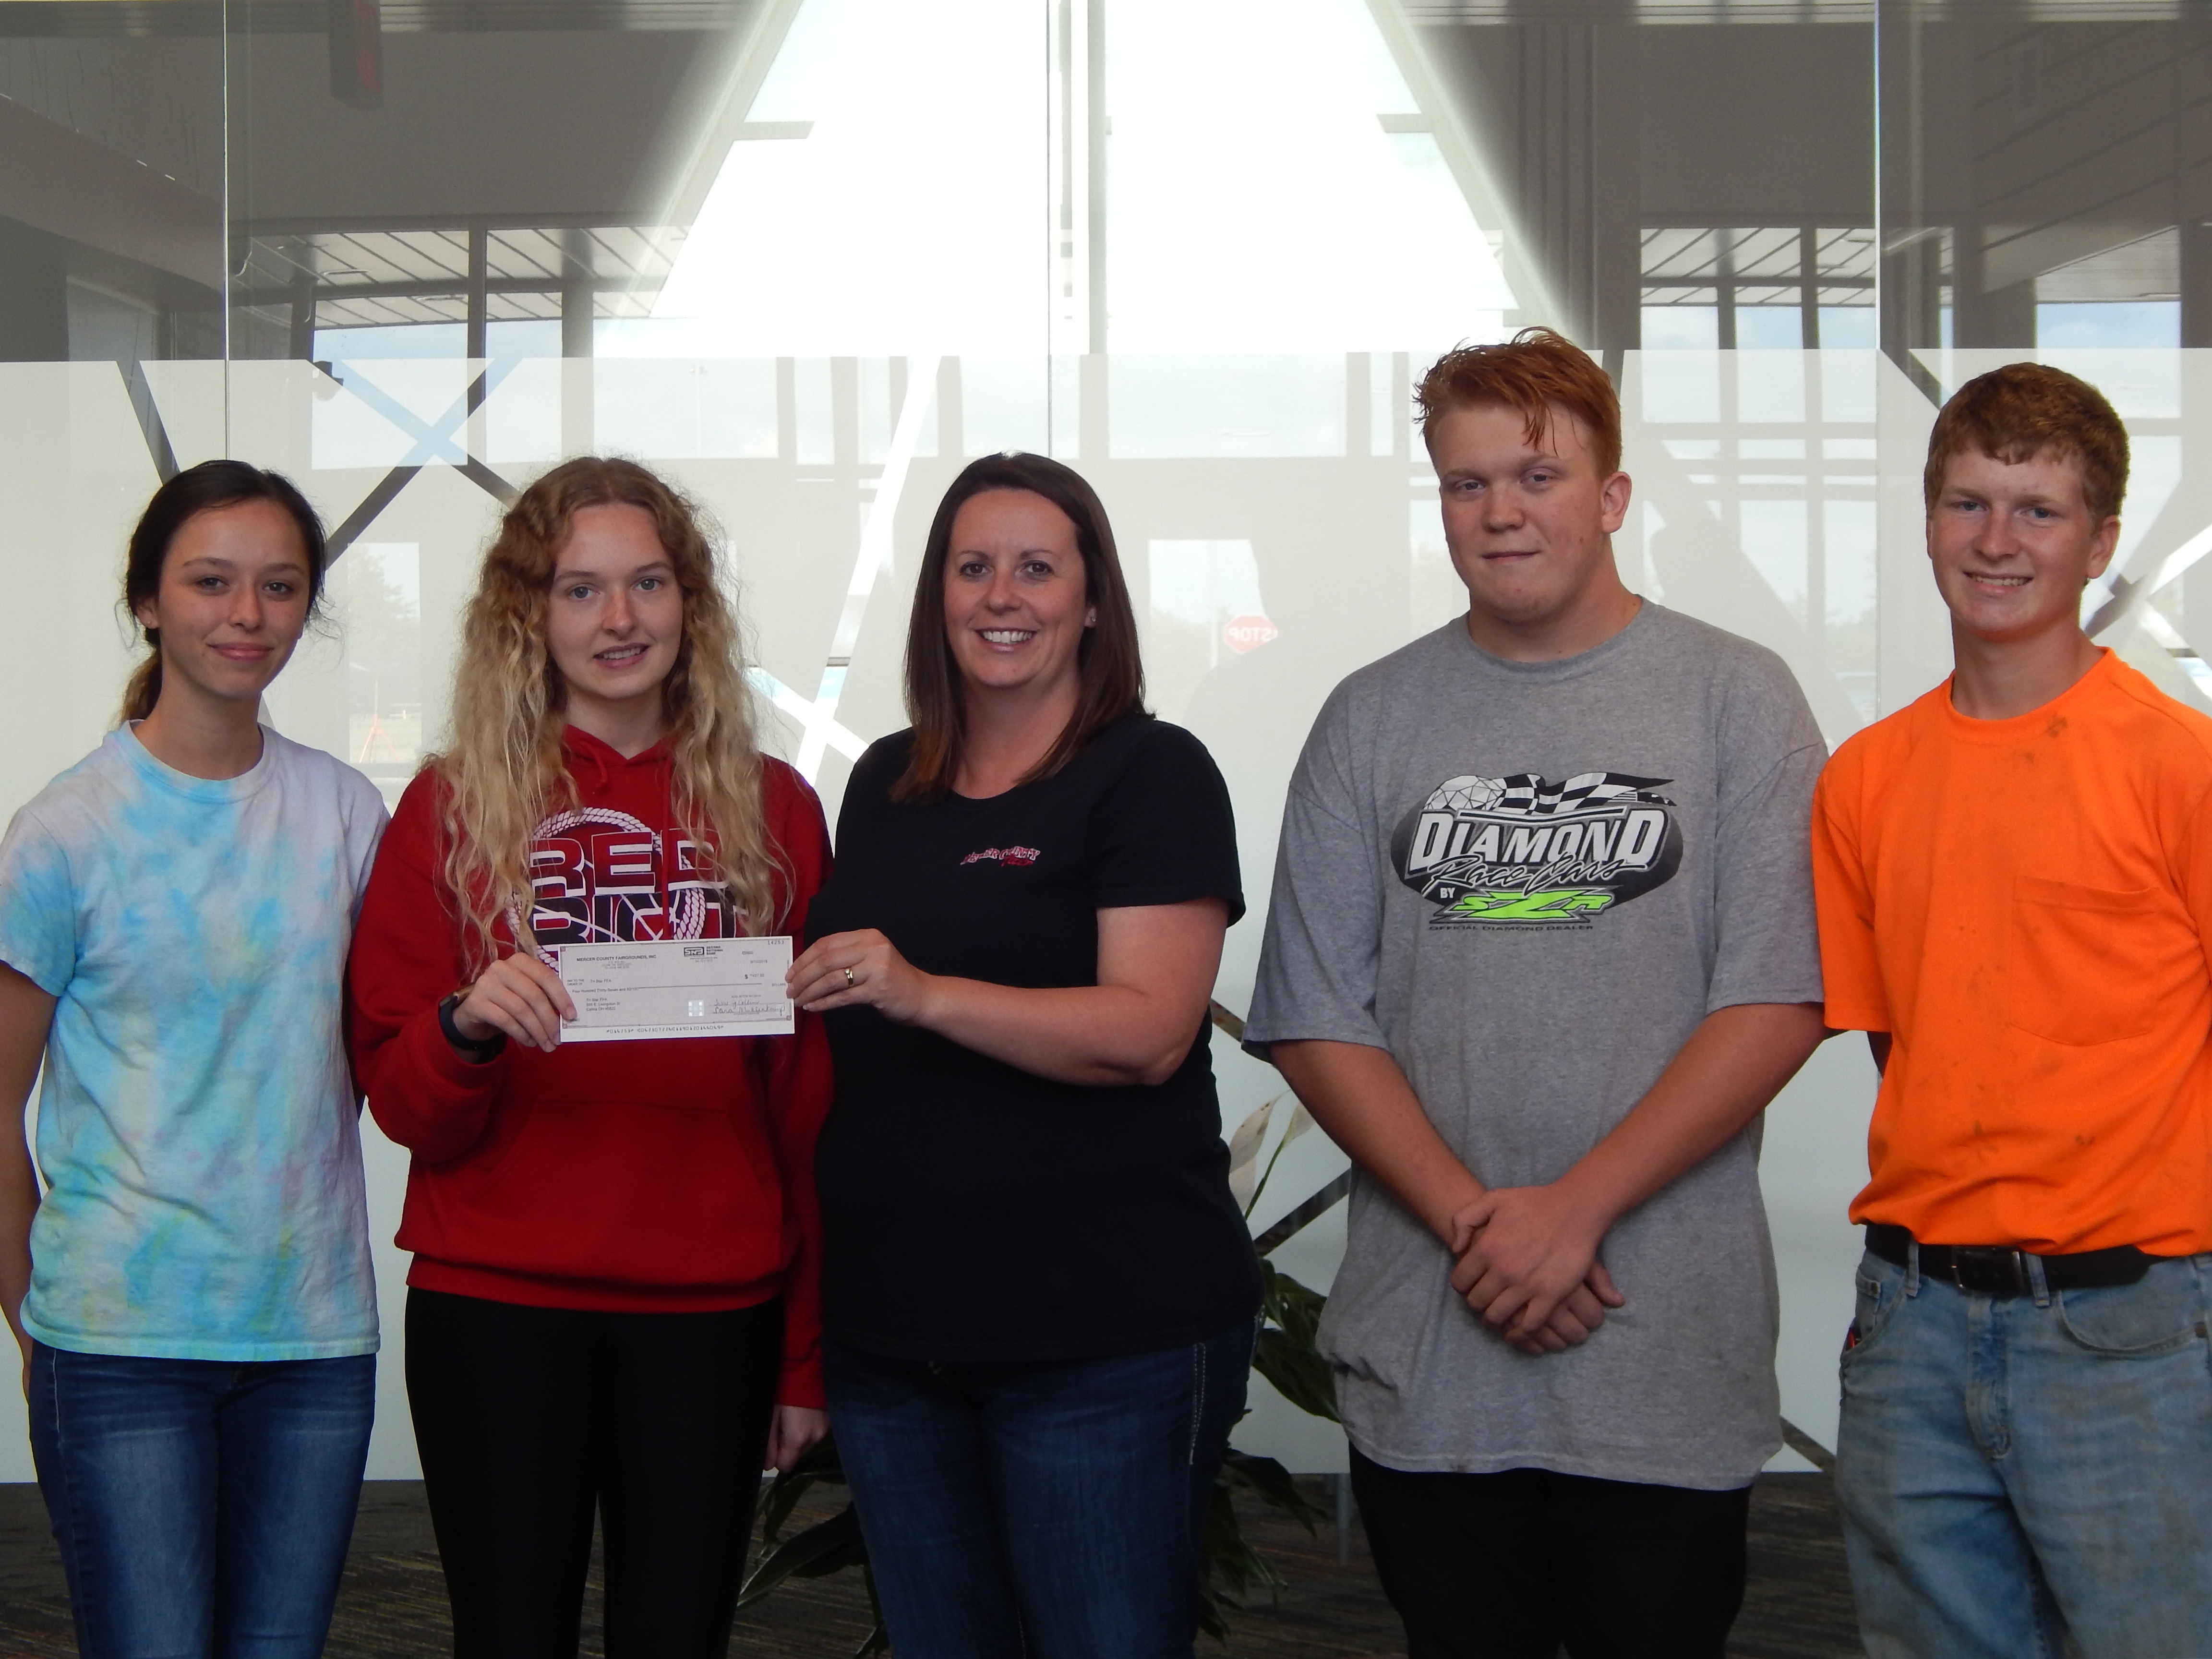  Tri Star FFA Receives Donation from the Mercer Co. Fair: Featured Image 1 